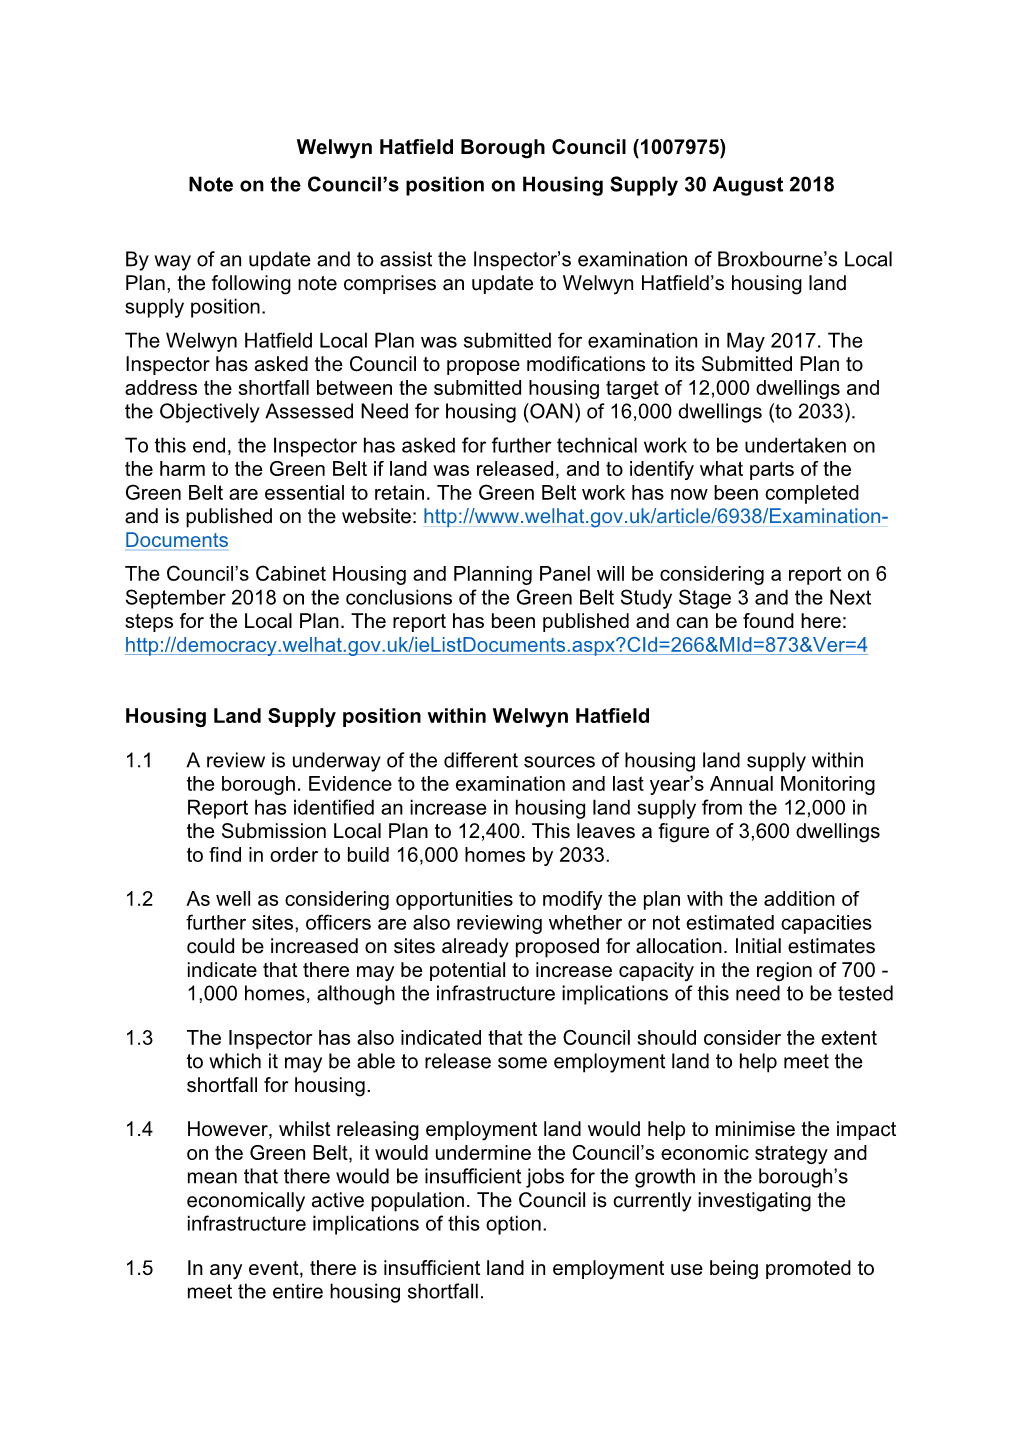 Welwyn Hatfield Borough Council (1007975) Note on the Council’S Position on Housing Supply 30 August 2018